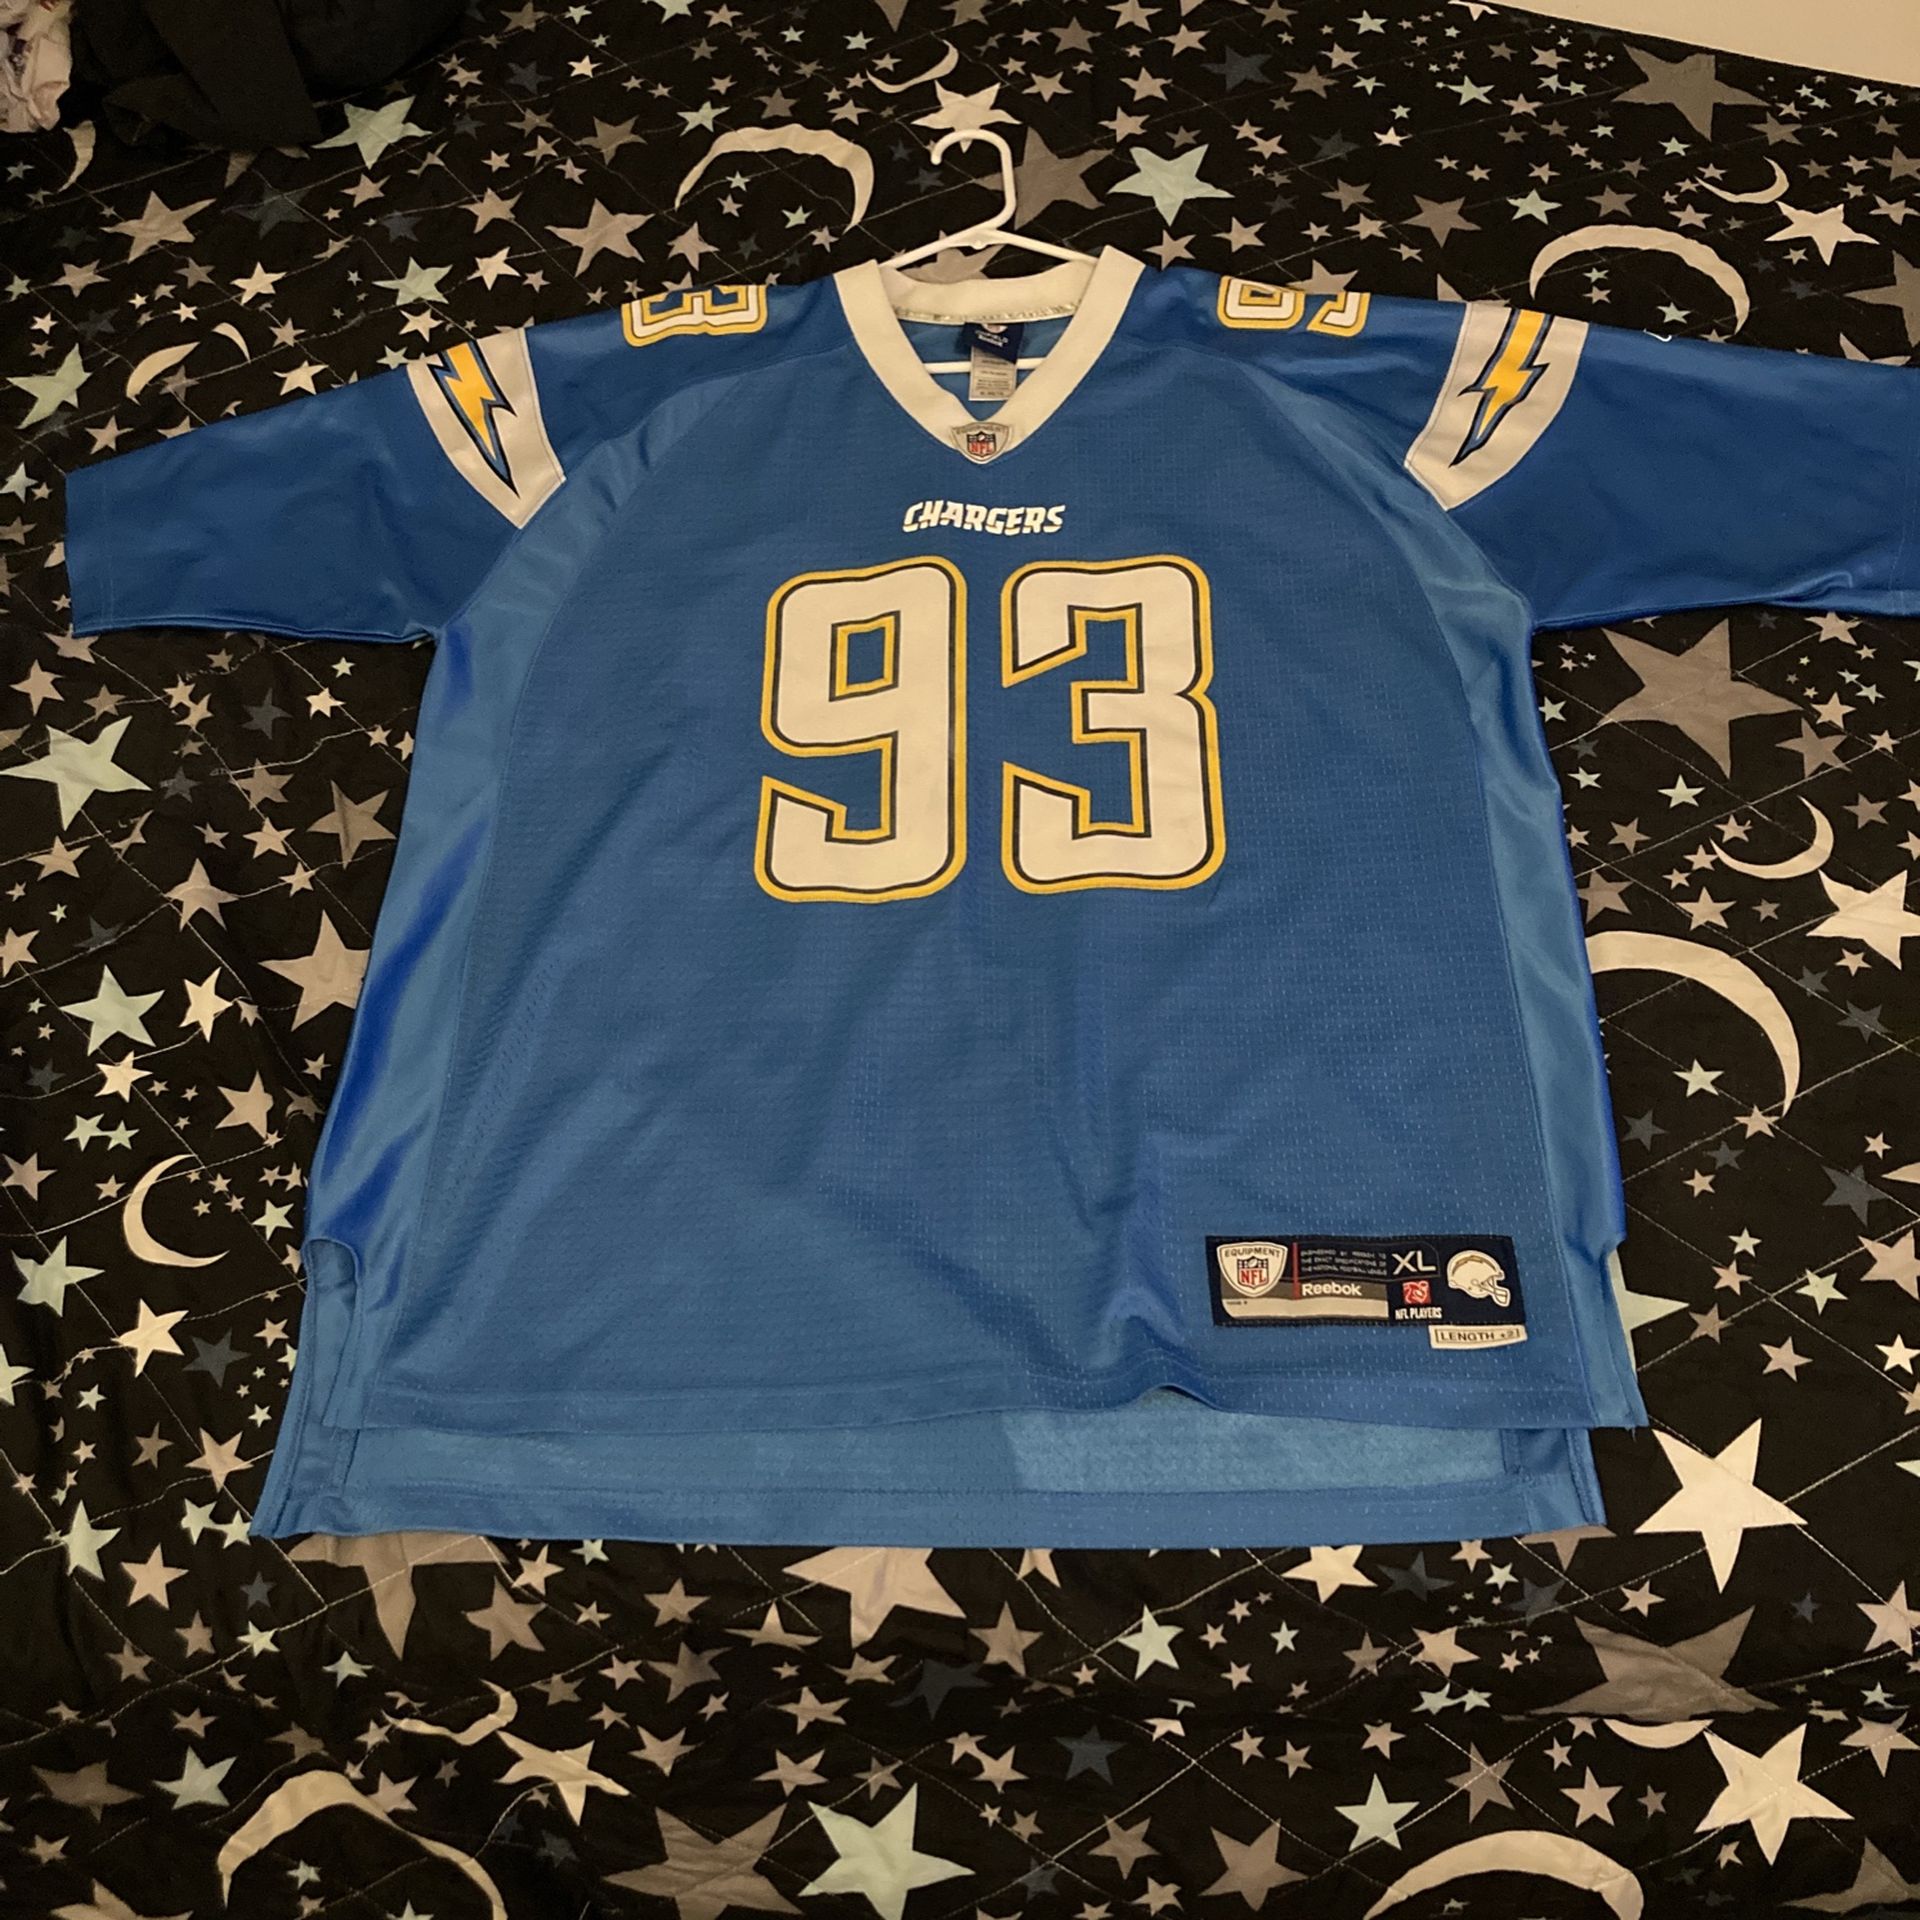 Chargers Jersey #93 Castillo